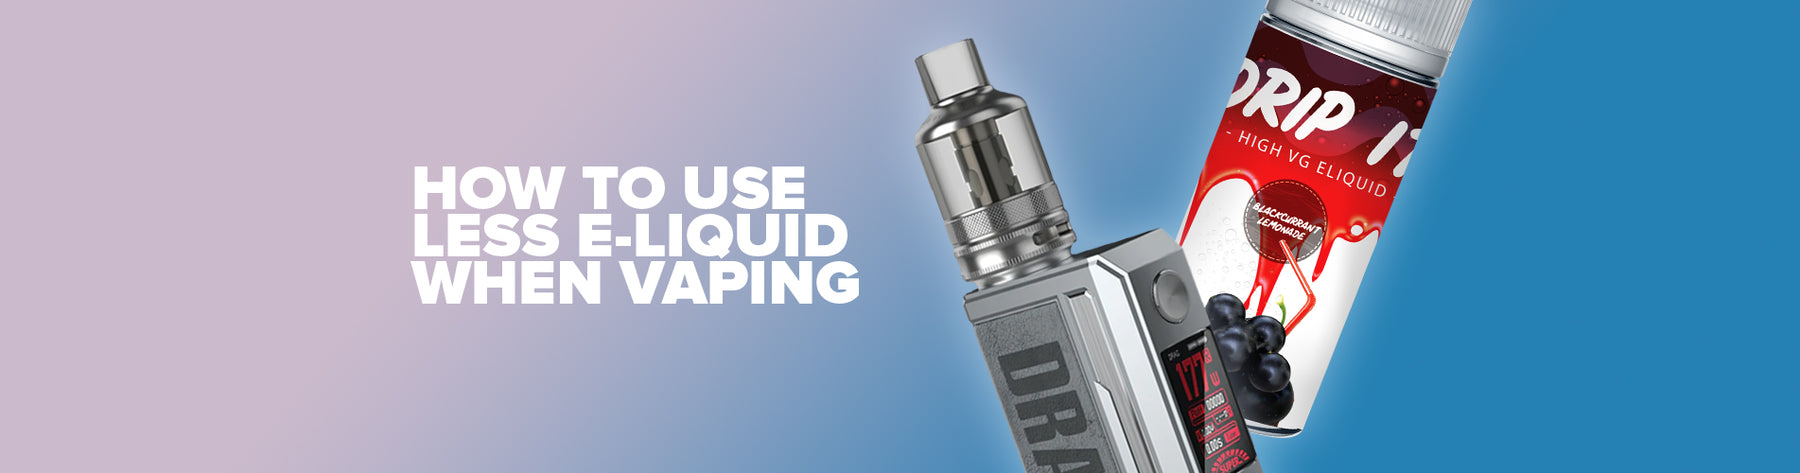 When Vaping, How To Use Less E-Liquid